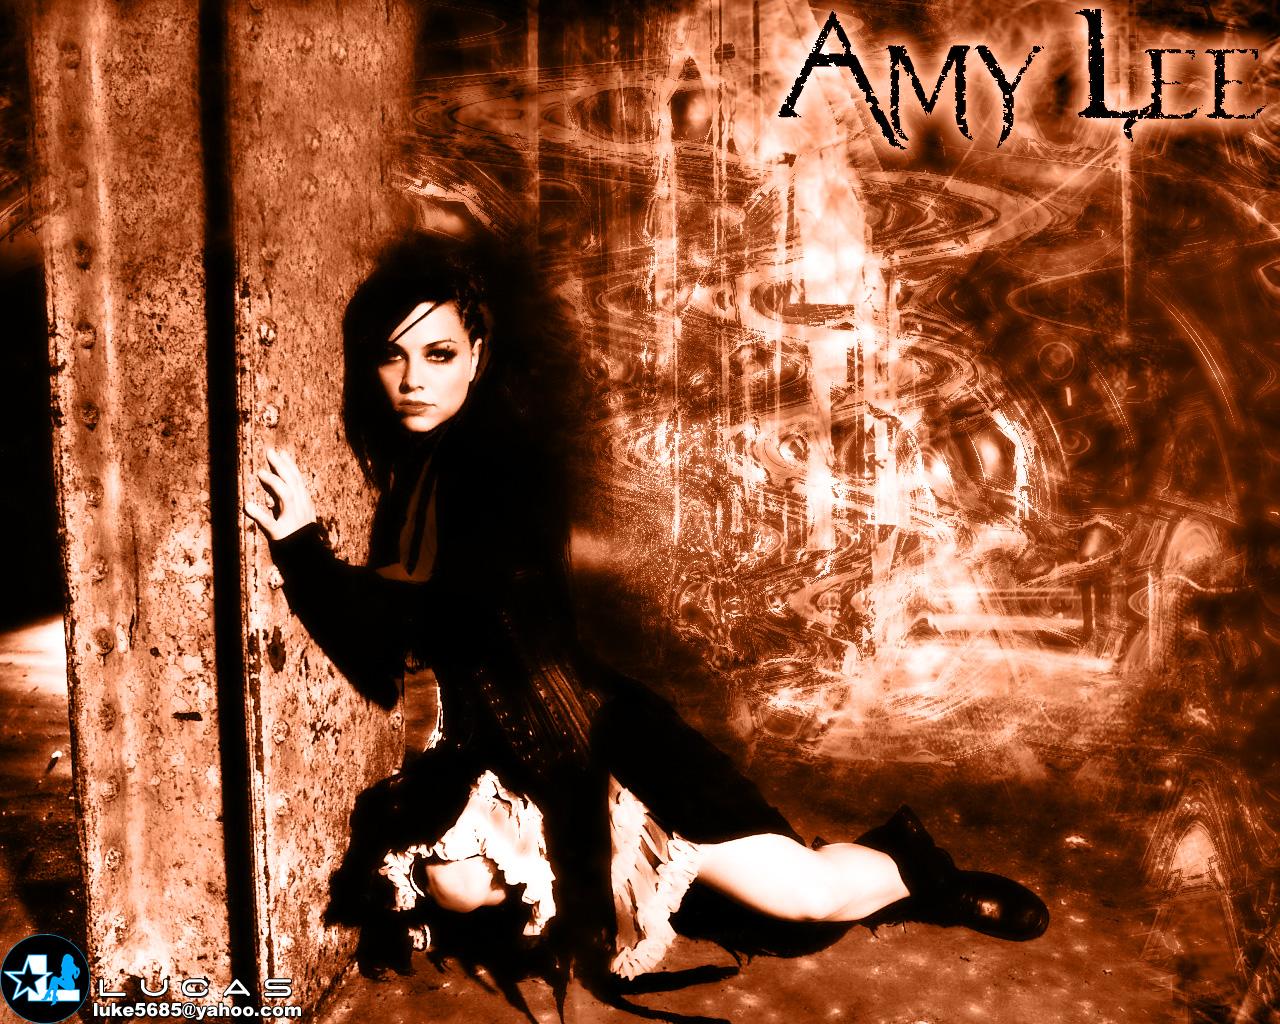 You are viewing the Amy Lee wallpaper named 